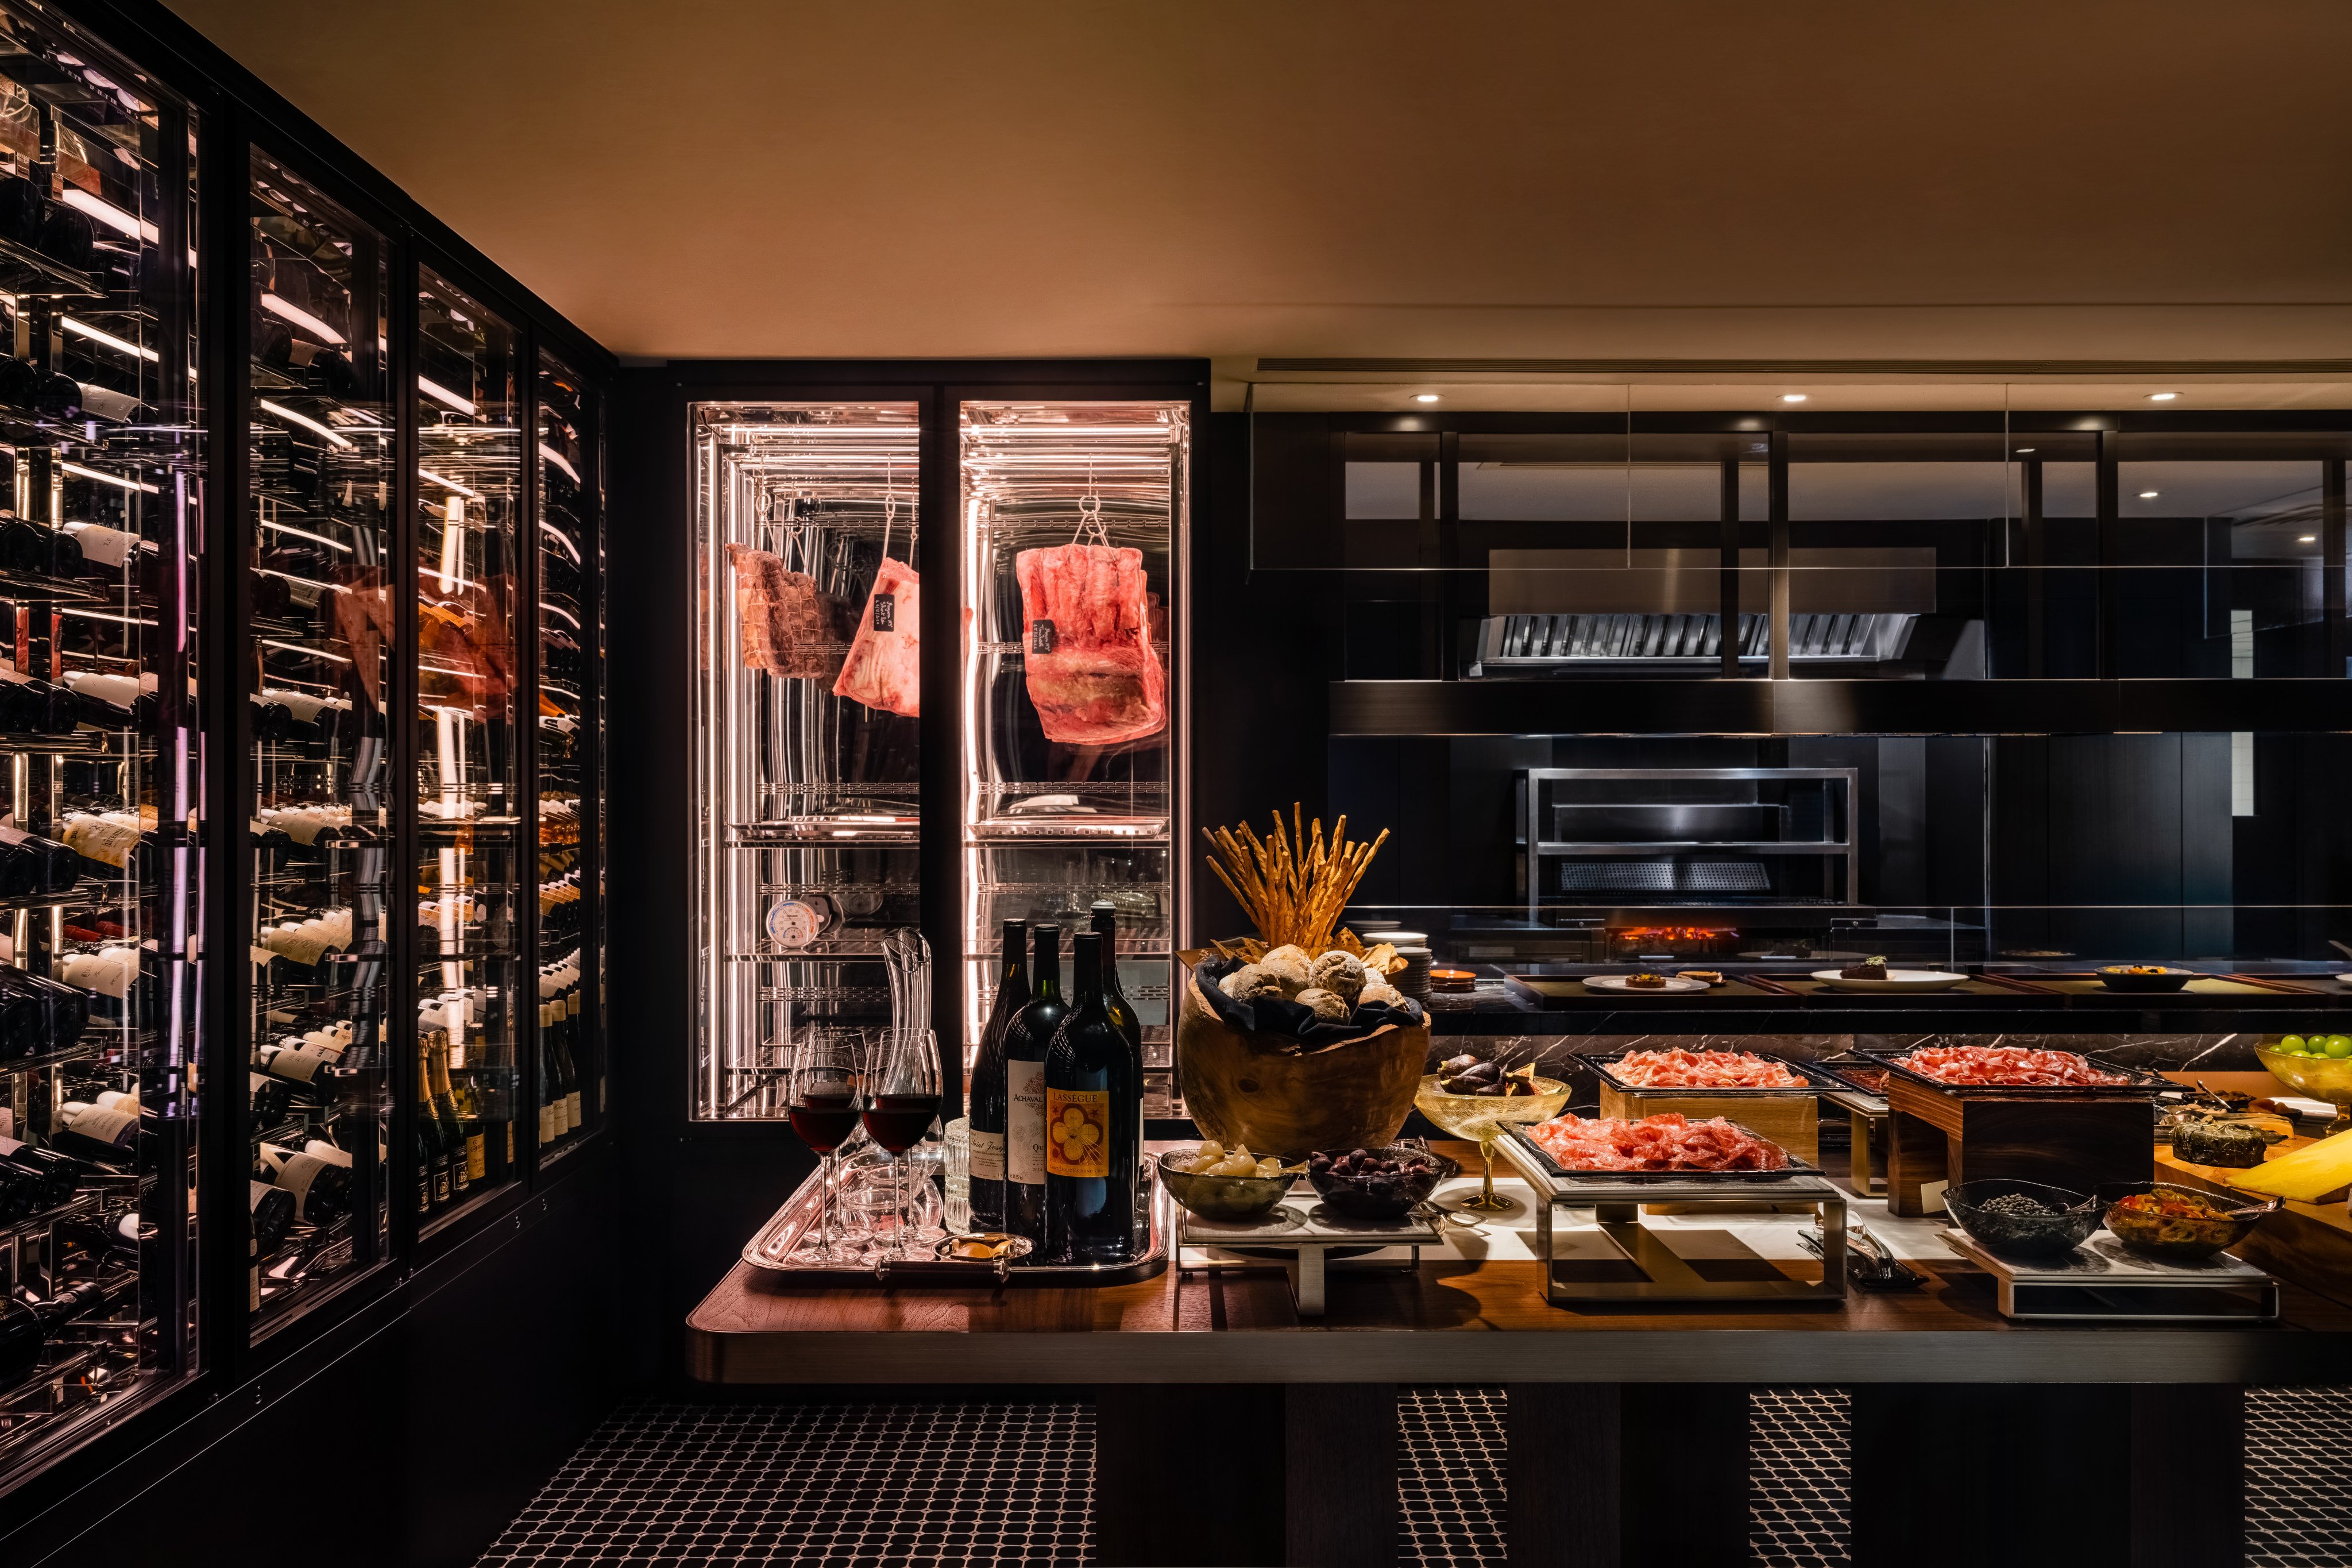 The Steak House at Regent Hong Kong’s open grill kitchen features its original charcoal grill and, as part of the stunning new design, houses the salad bar, dry age meat fridge, and wine cellar. Photos: Handout